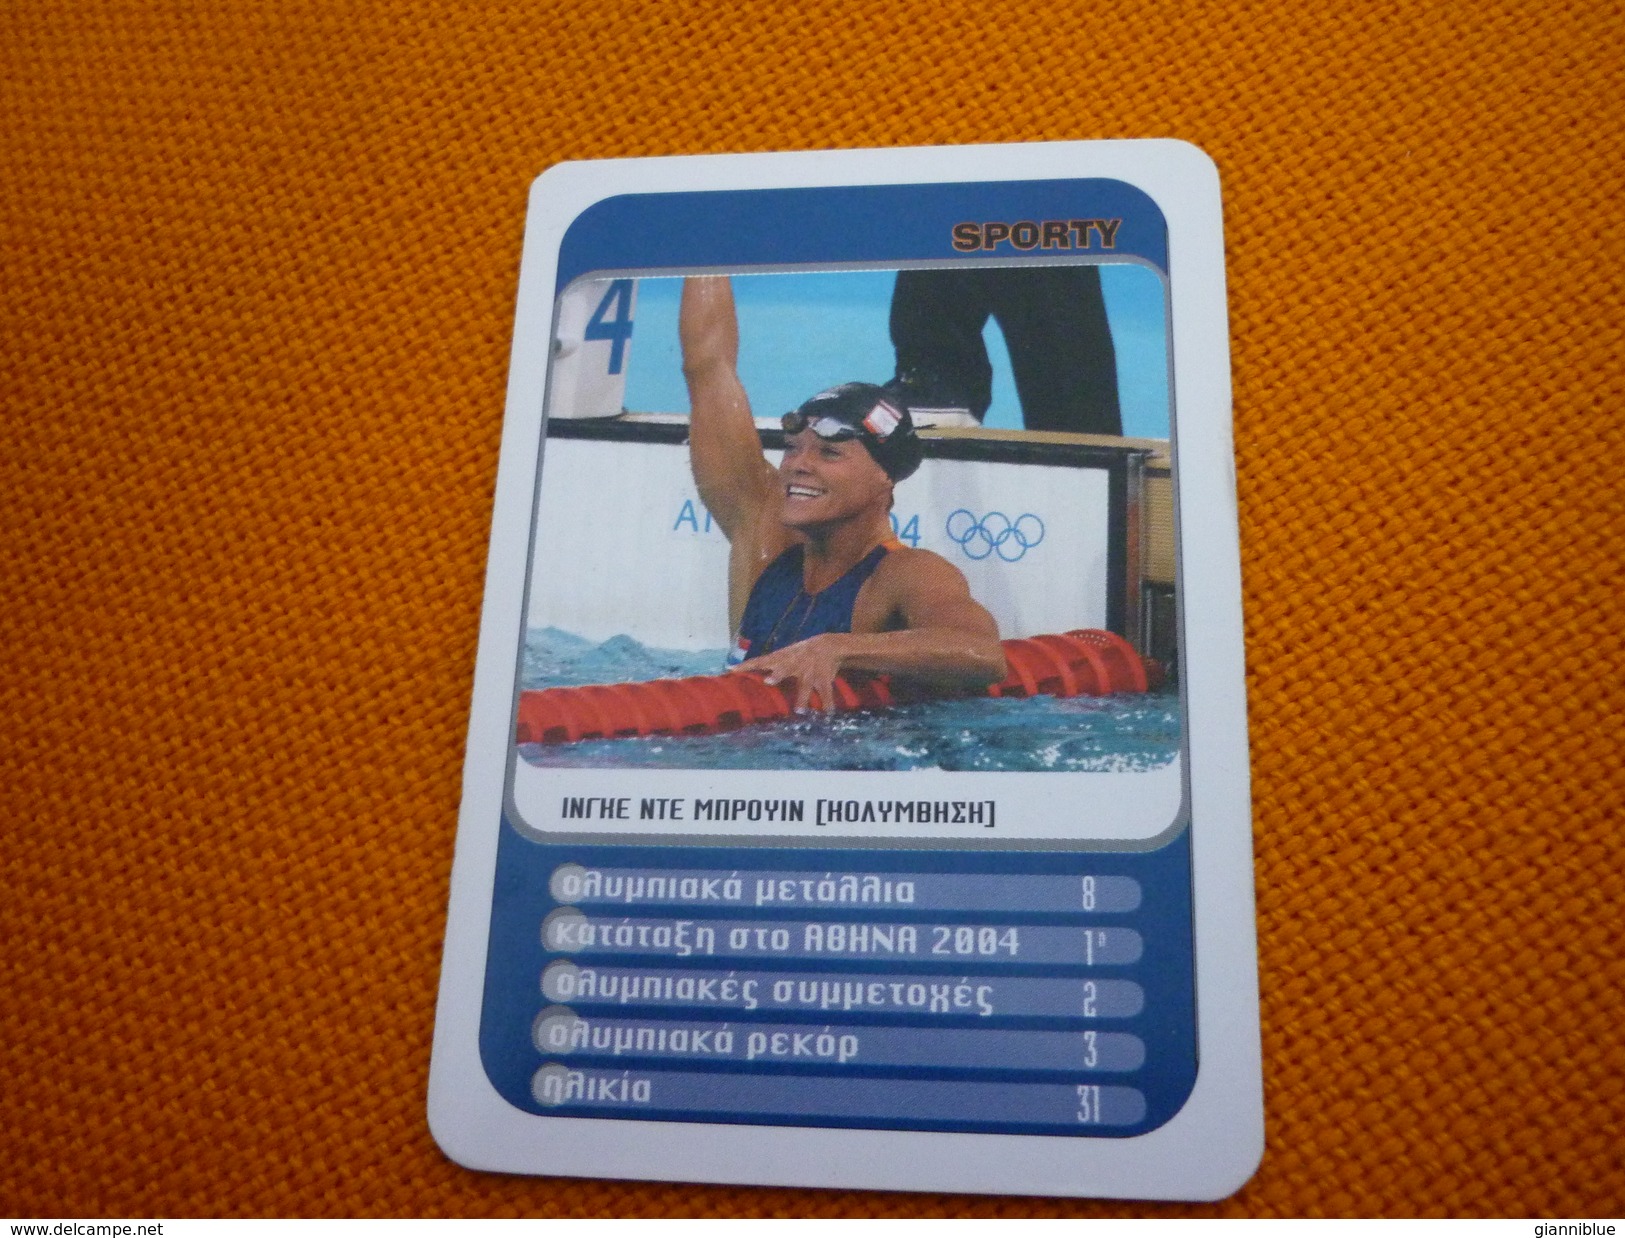 Inge De Bruijn Dutch Swimmer Swimming Athens 2004 Olympic Games Medalist Greece Greek Trading Card - Trading Cards